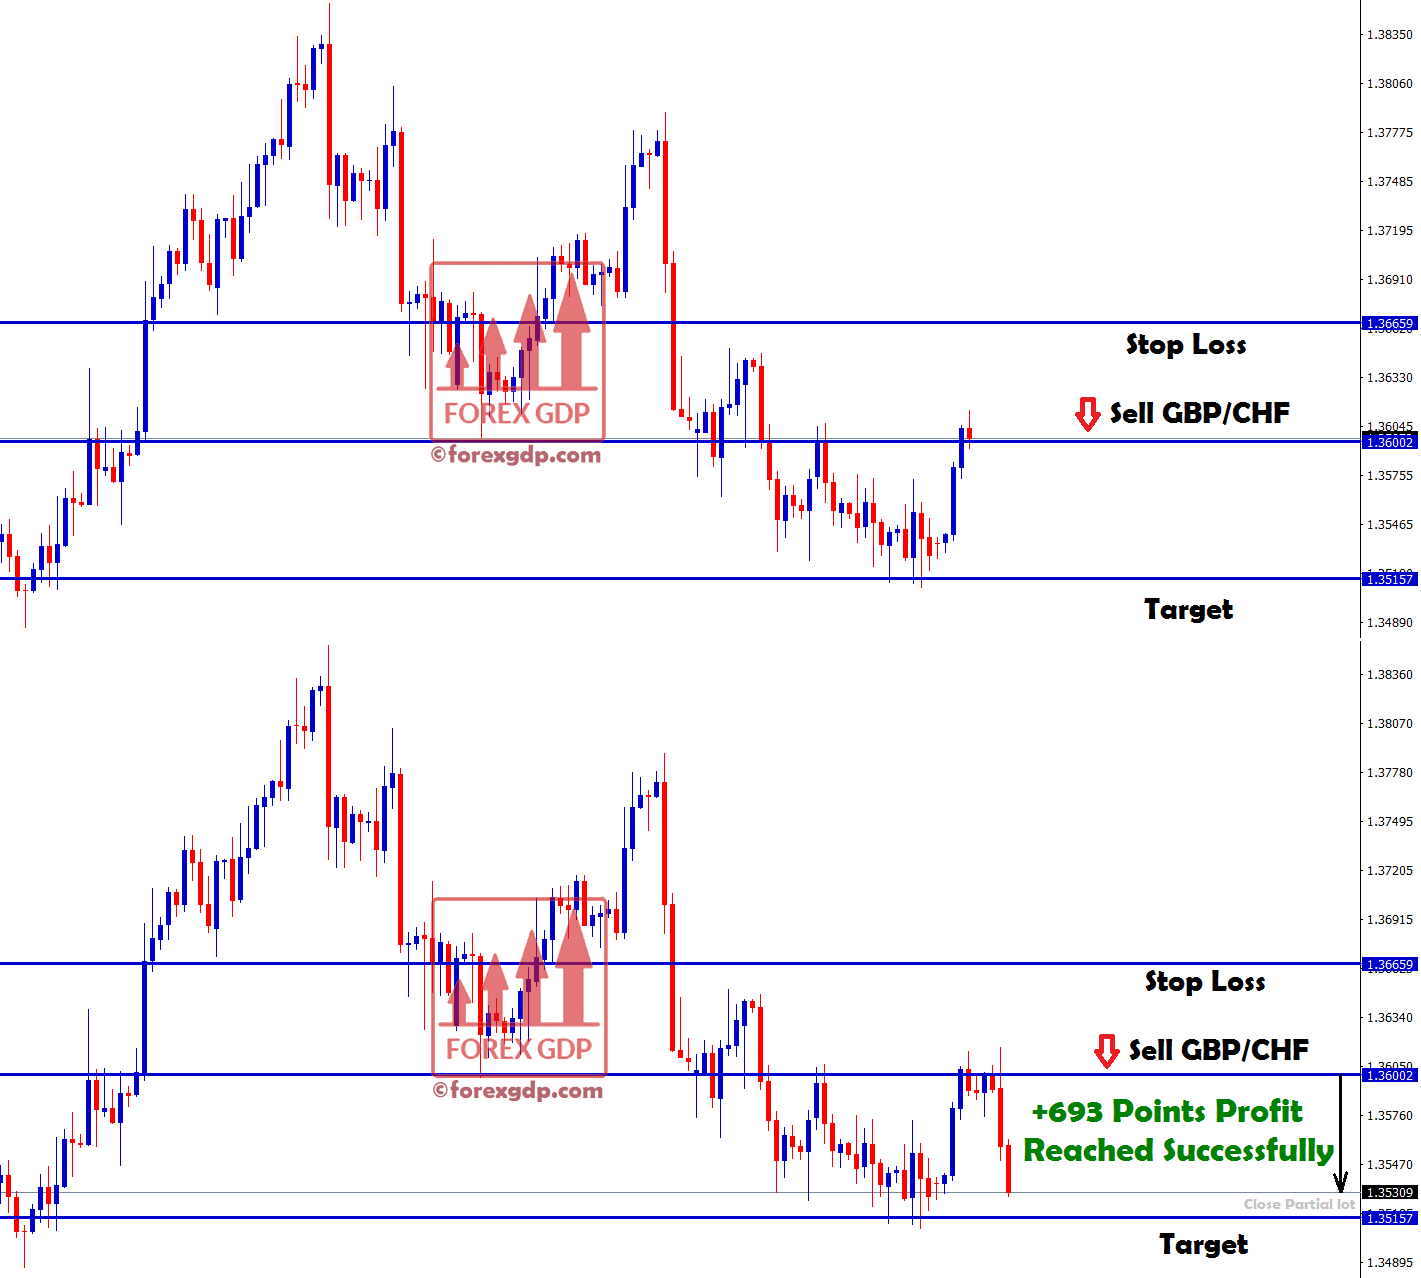 sell signal in gbp chf hits take profit with +693 points